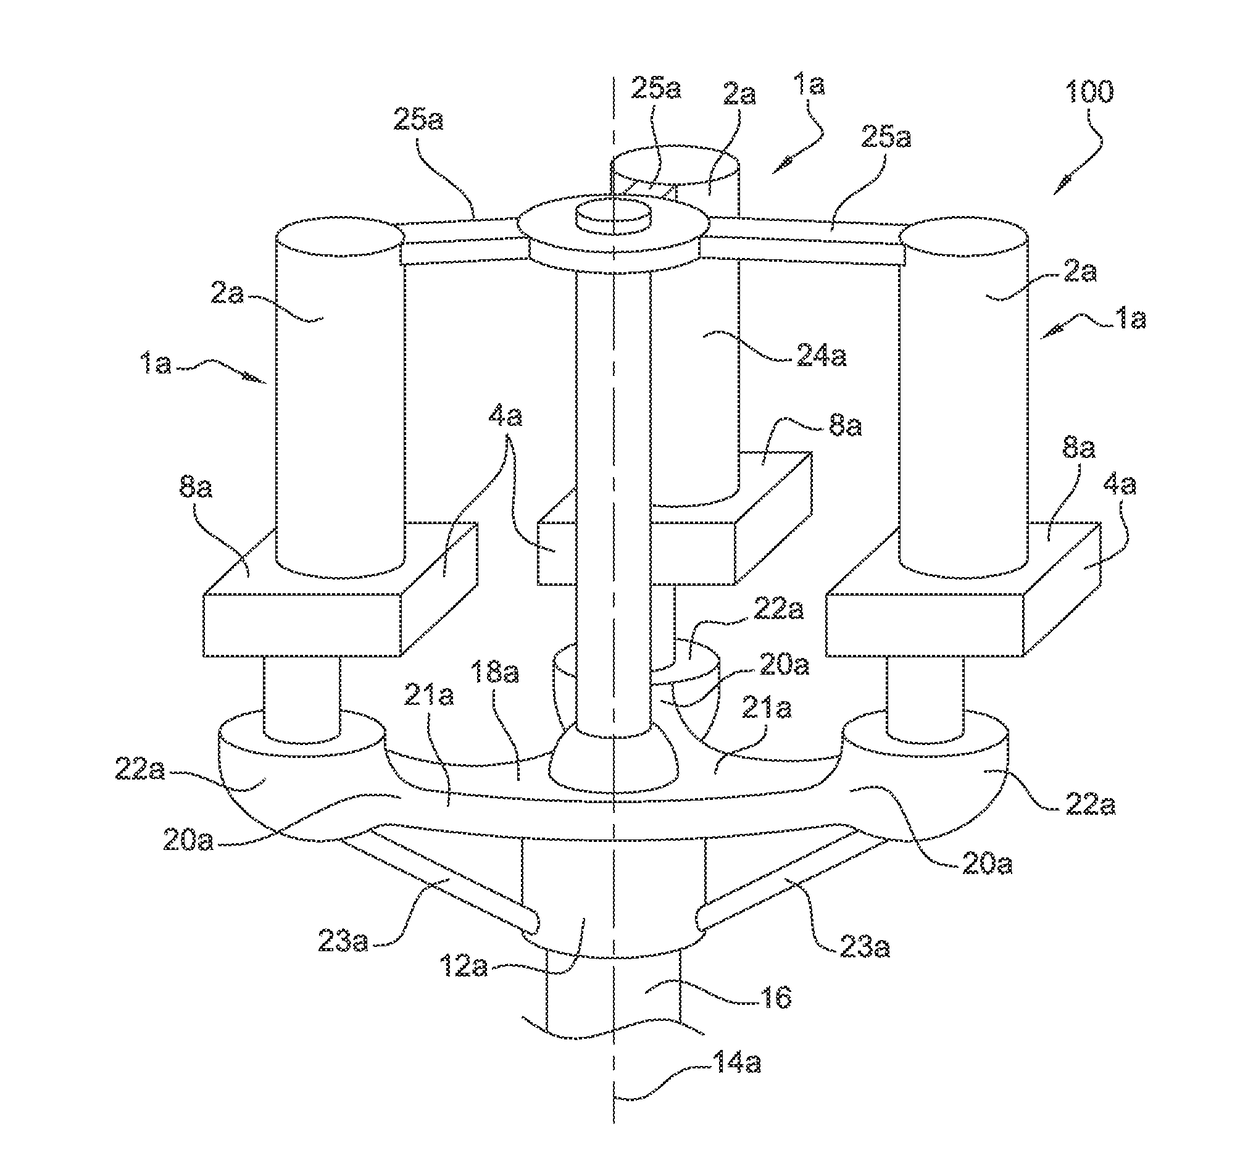 Improved method for manufacturing a shell mold for production by lost-wax casting of bladed elements of an aircraft turbine engine